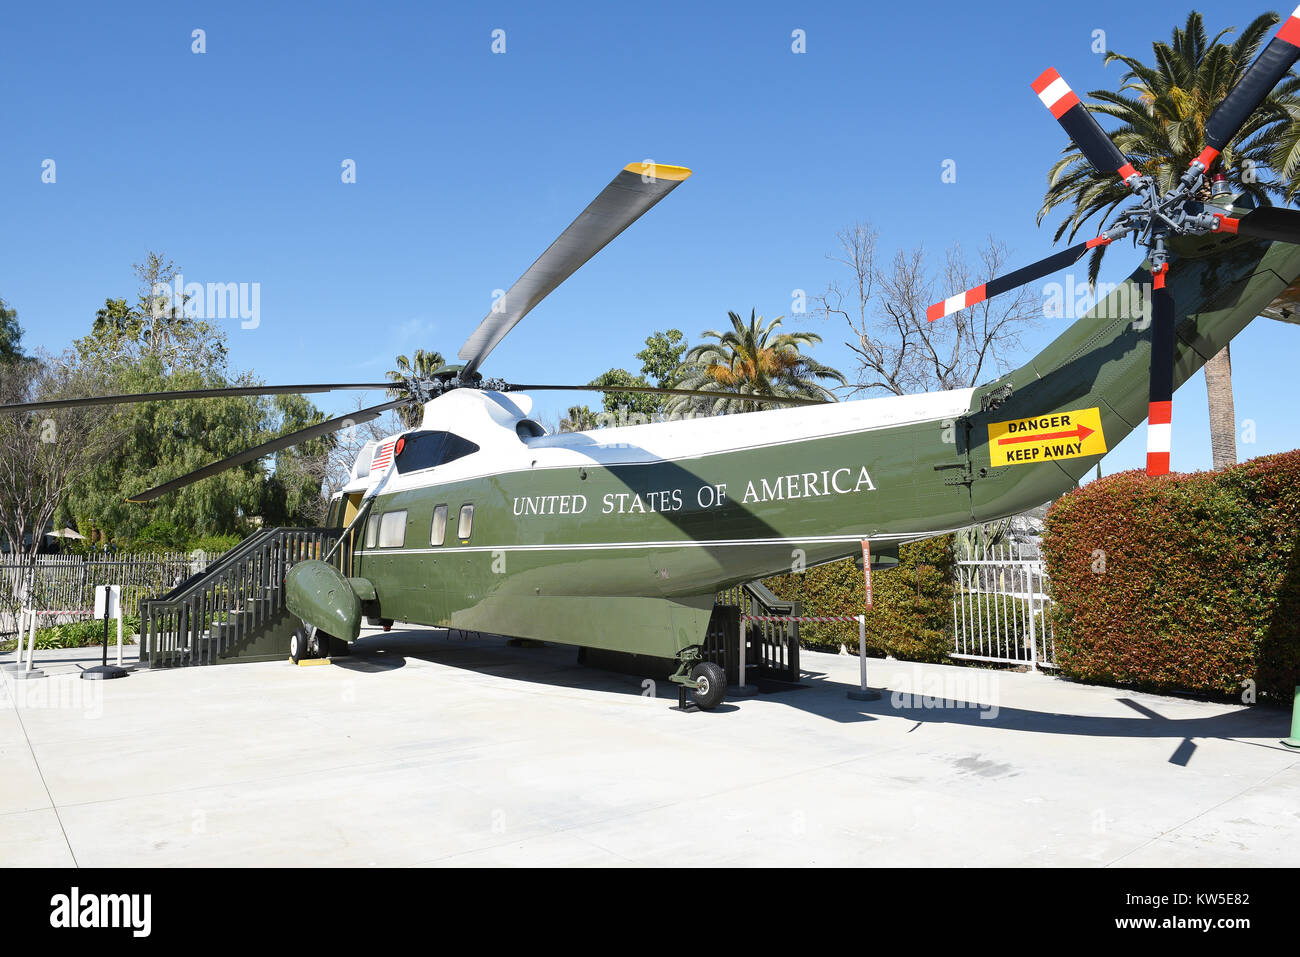 YORBA LINDA, CALIFORNIA - FEBRUARY 24, 2017: Marine One at the Nixon Library. The helicopter was used by 4 presidents, Kennedy, Johnson, Nixon and For Stock Photo